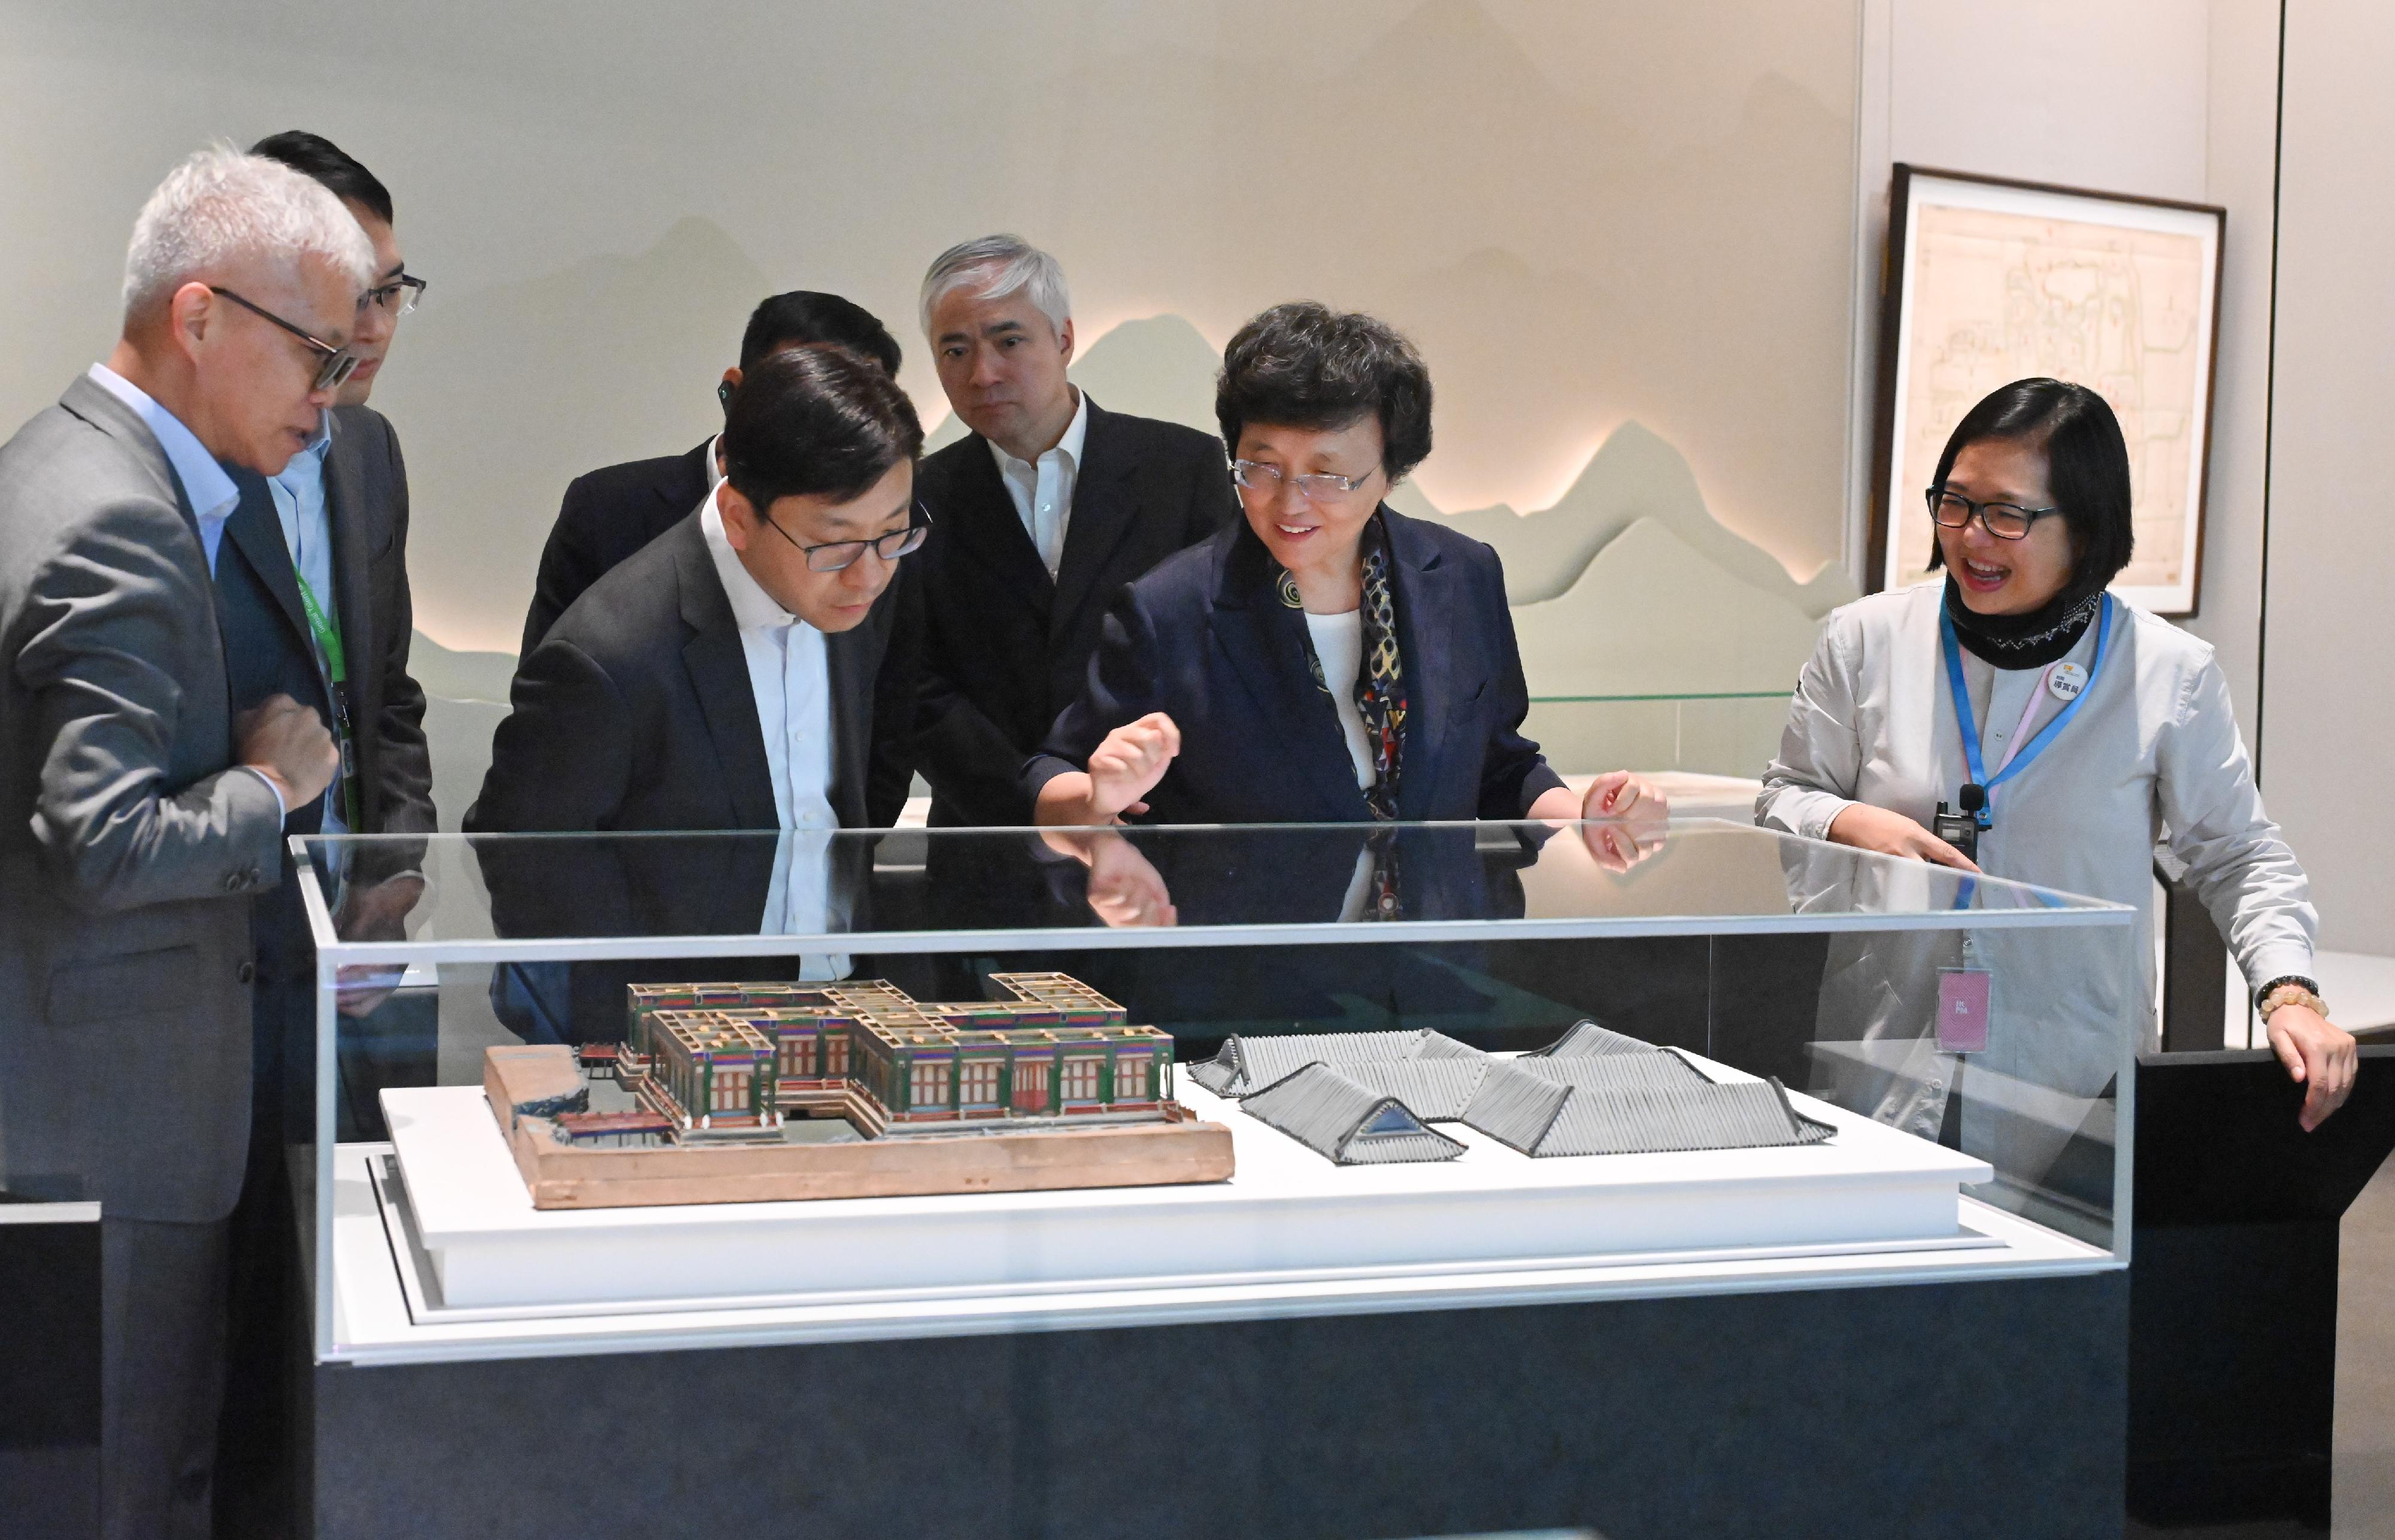 The Minister of Human Resources and Social Security, Ms Wang Xiaoping, visited the "YUAN MING YUAN - Art and Culture of an Imperial Garden-Palace" exhibition at the Hong Kong Palace Museum yesterday (May 6). The Chief Secretary for Administration, Mr Chan Kwok-ki, hosted a welcome dinner for Ms Wang as well as officials, guests and speakers visiting Hong Kong for the Global Talent Summit · Hong Kong. Photo shows Ms Wang (front row, second right), accompanied by the Secretary for Labour and Welfare, Mr Chris Sun (front row, second left), touring the exhibition.